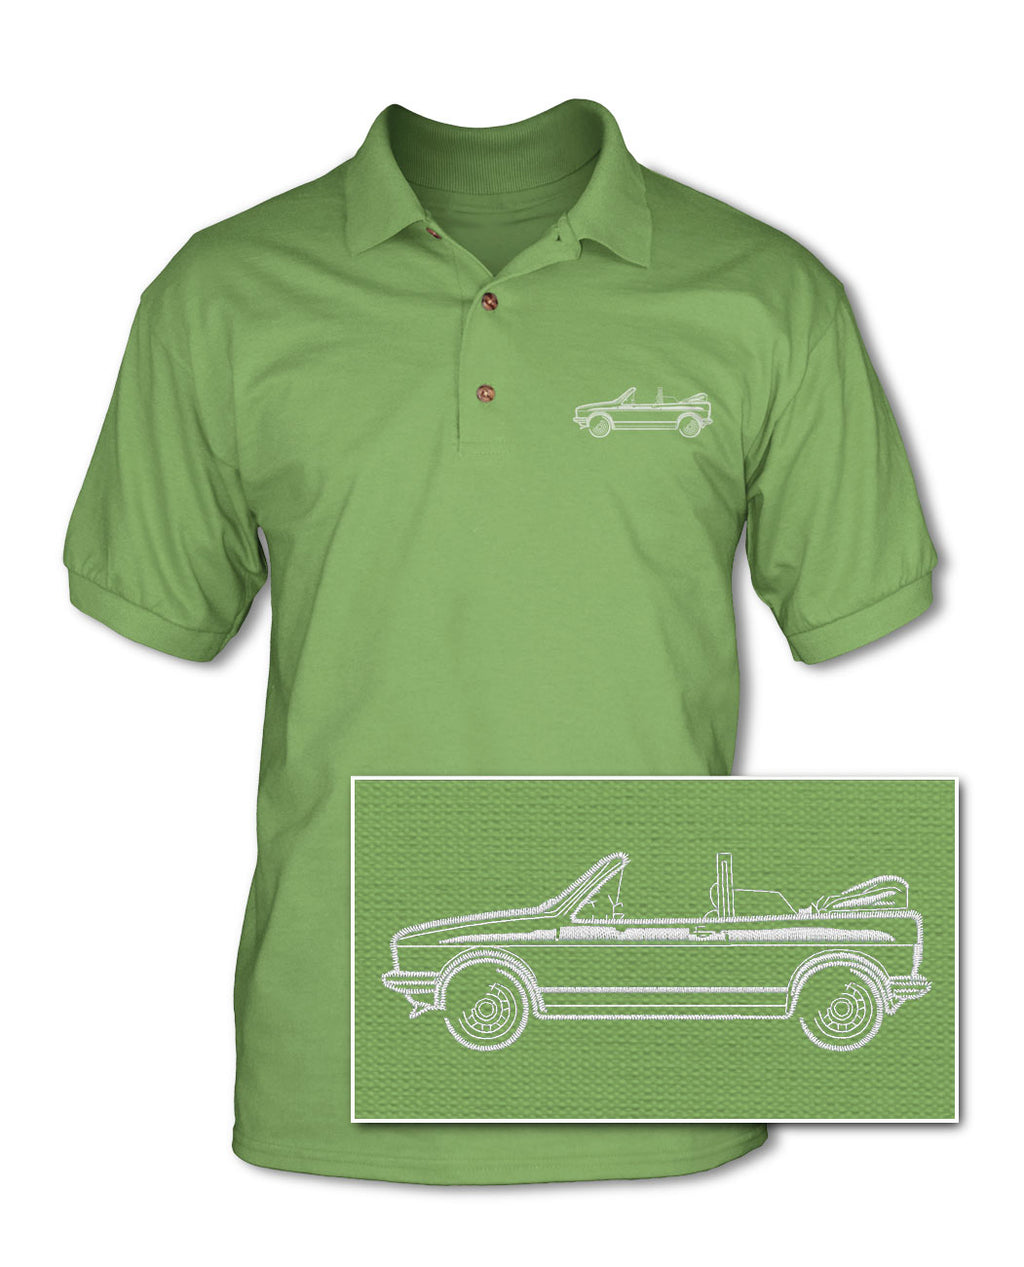 Volkswagen Golf Rabbit Cabriolet Convertible - Adult Pique Polo Shirt - Side View